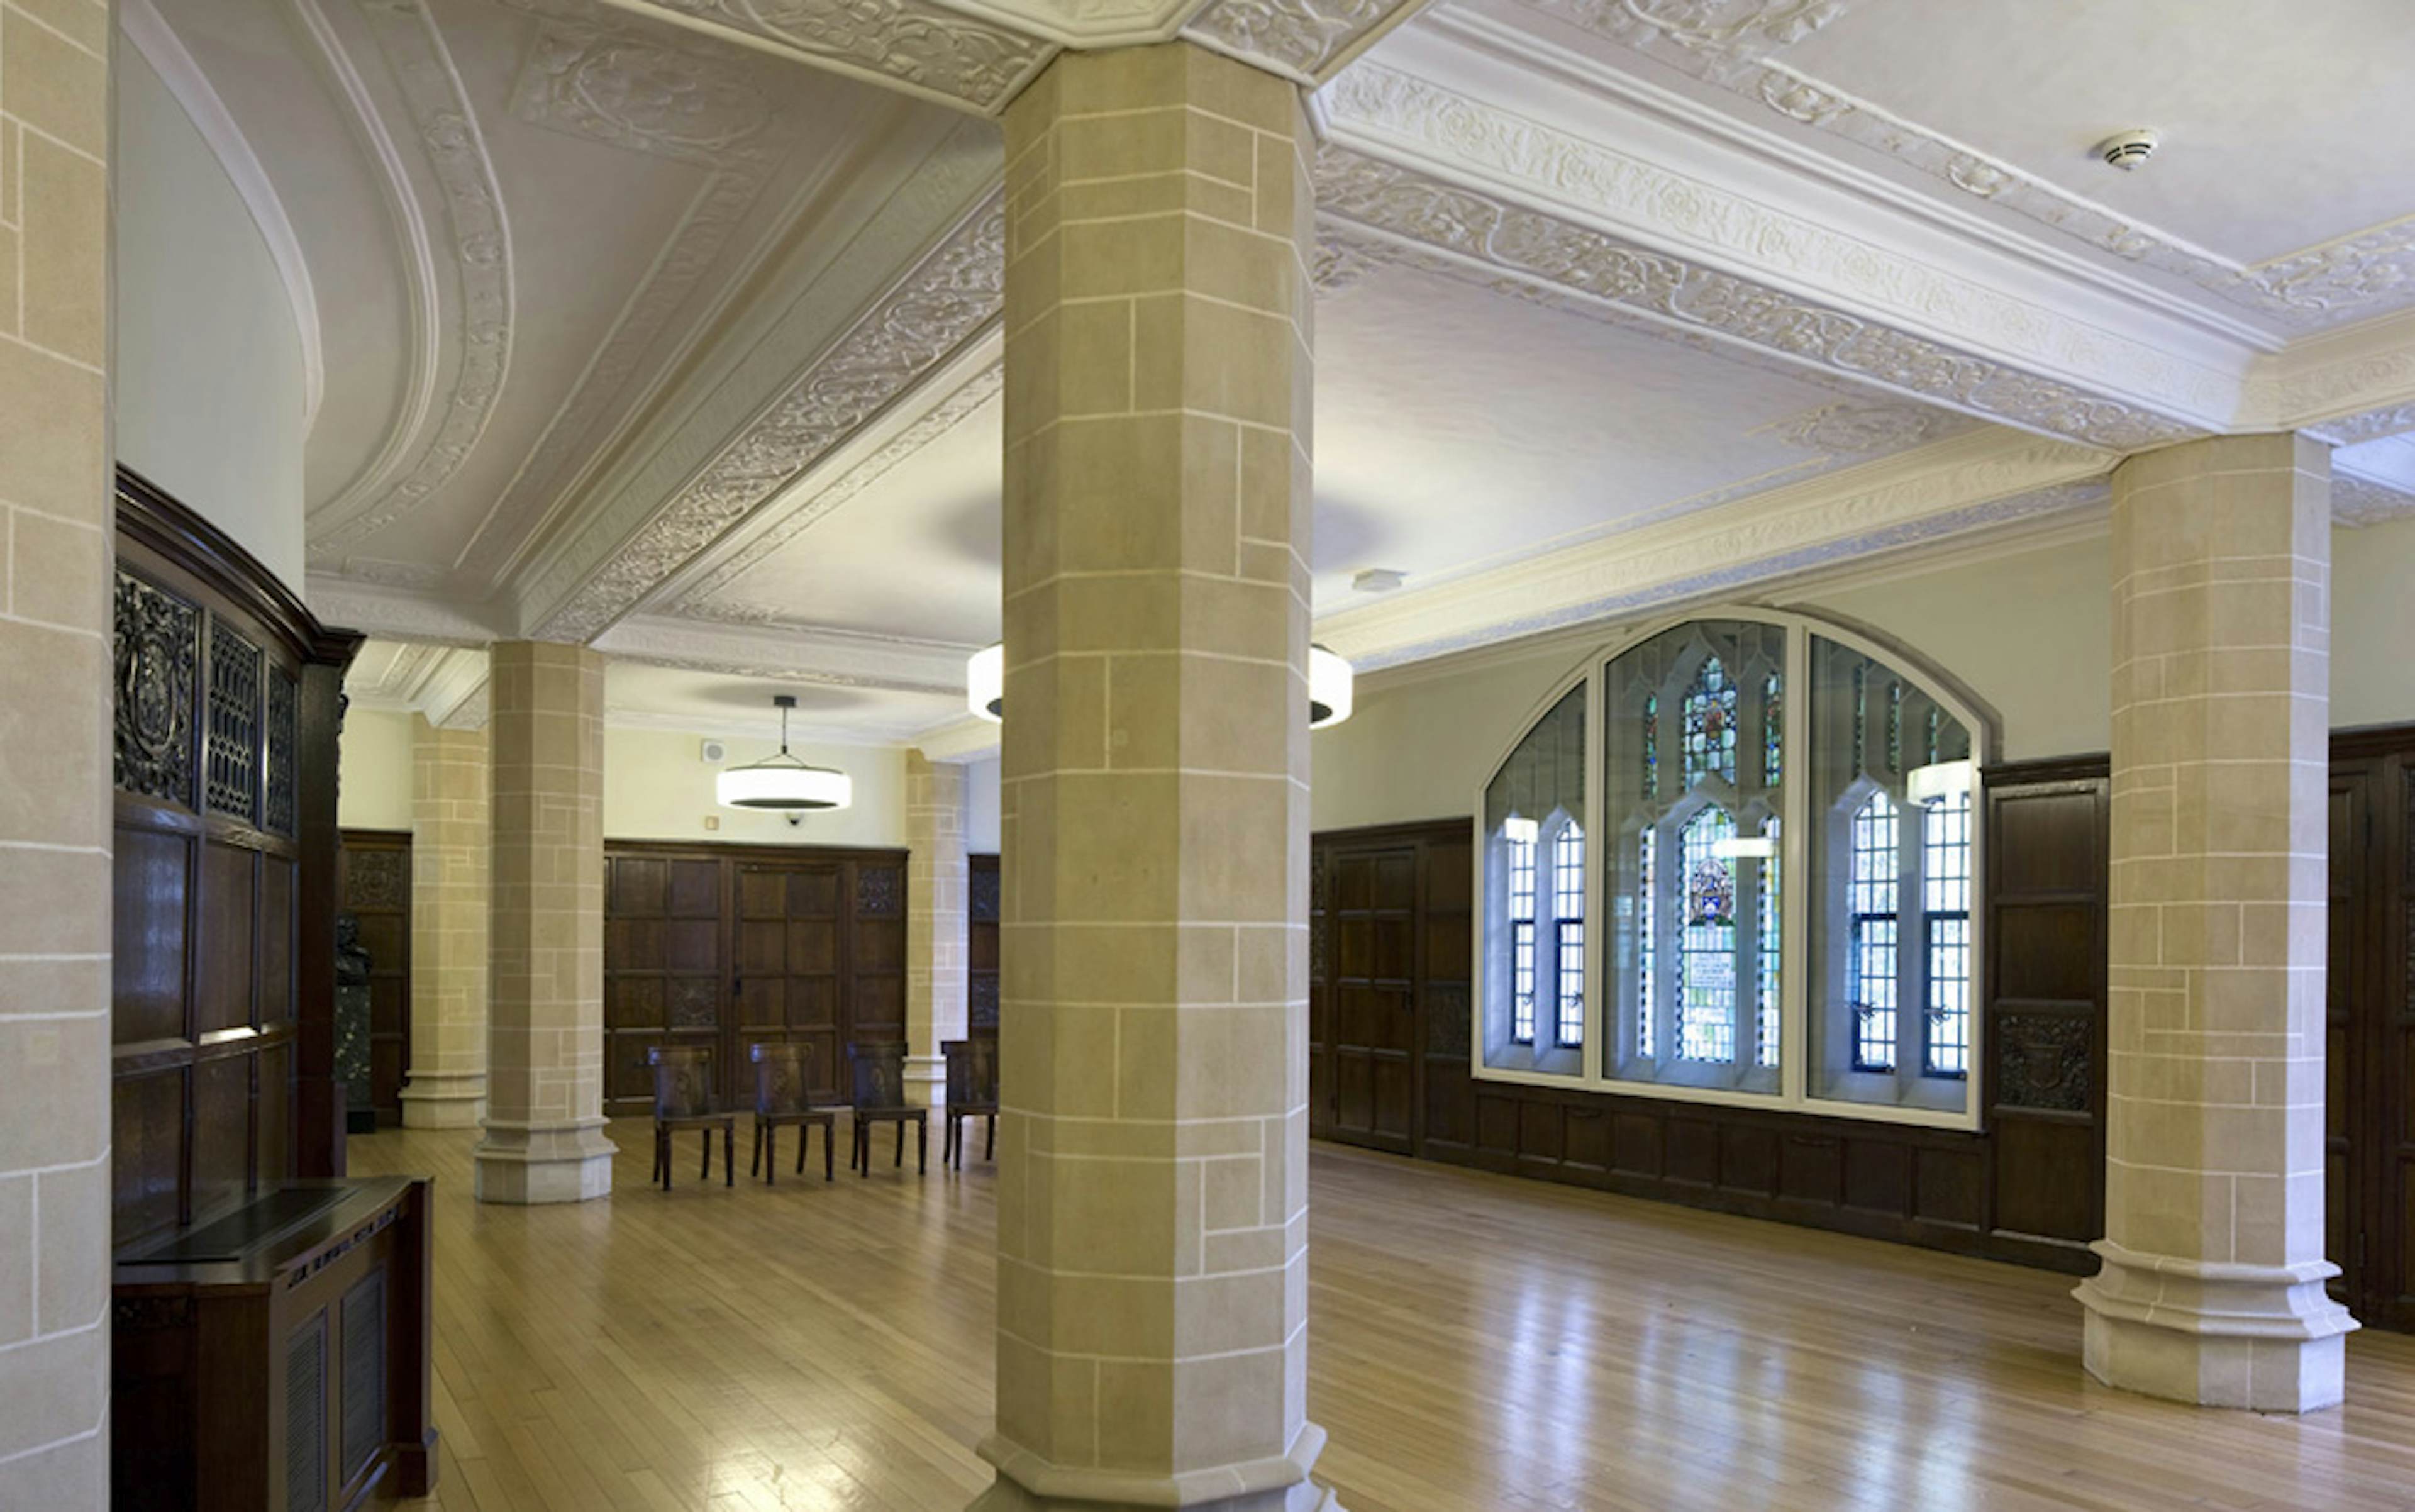 The Supreme Court of the United Kingdom - The Lobby image 1